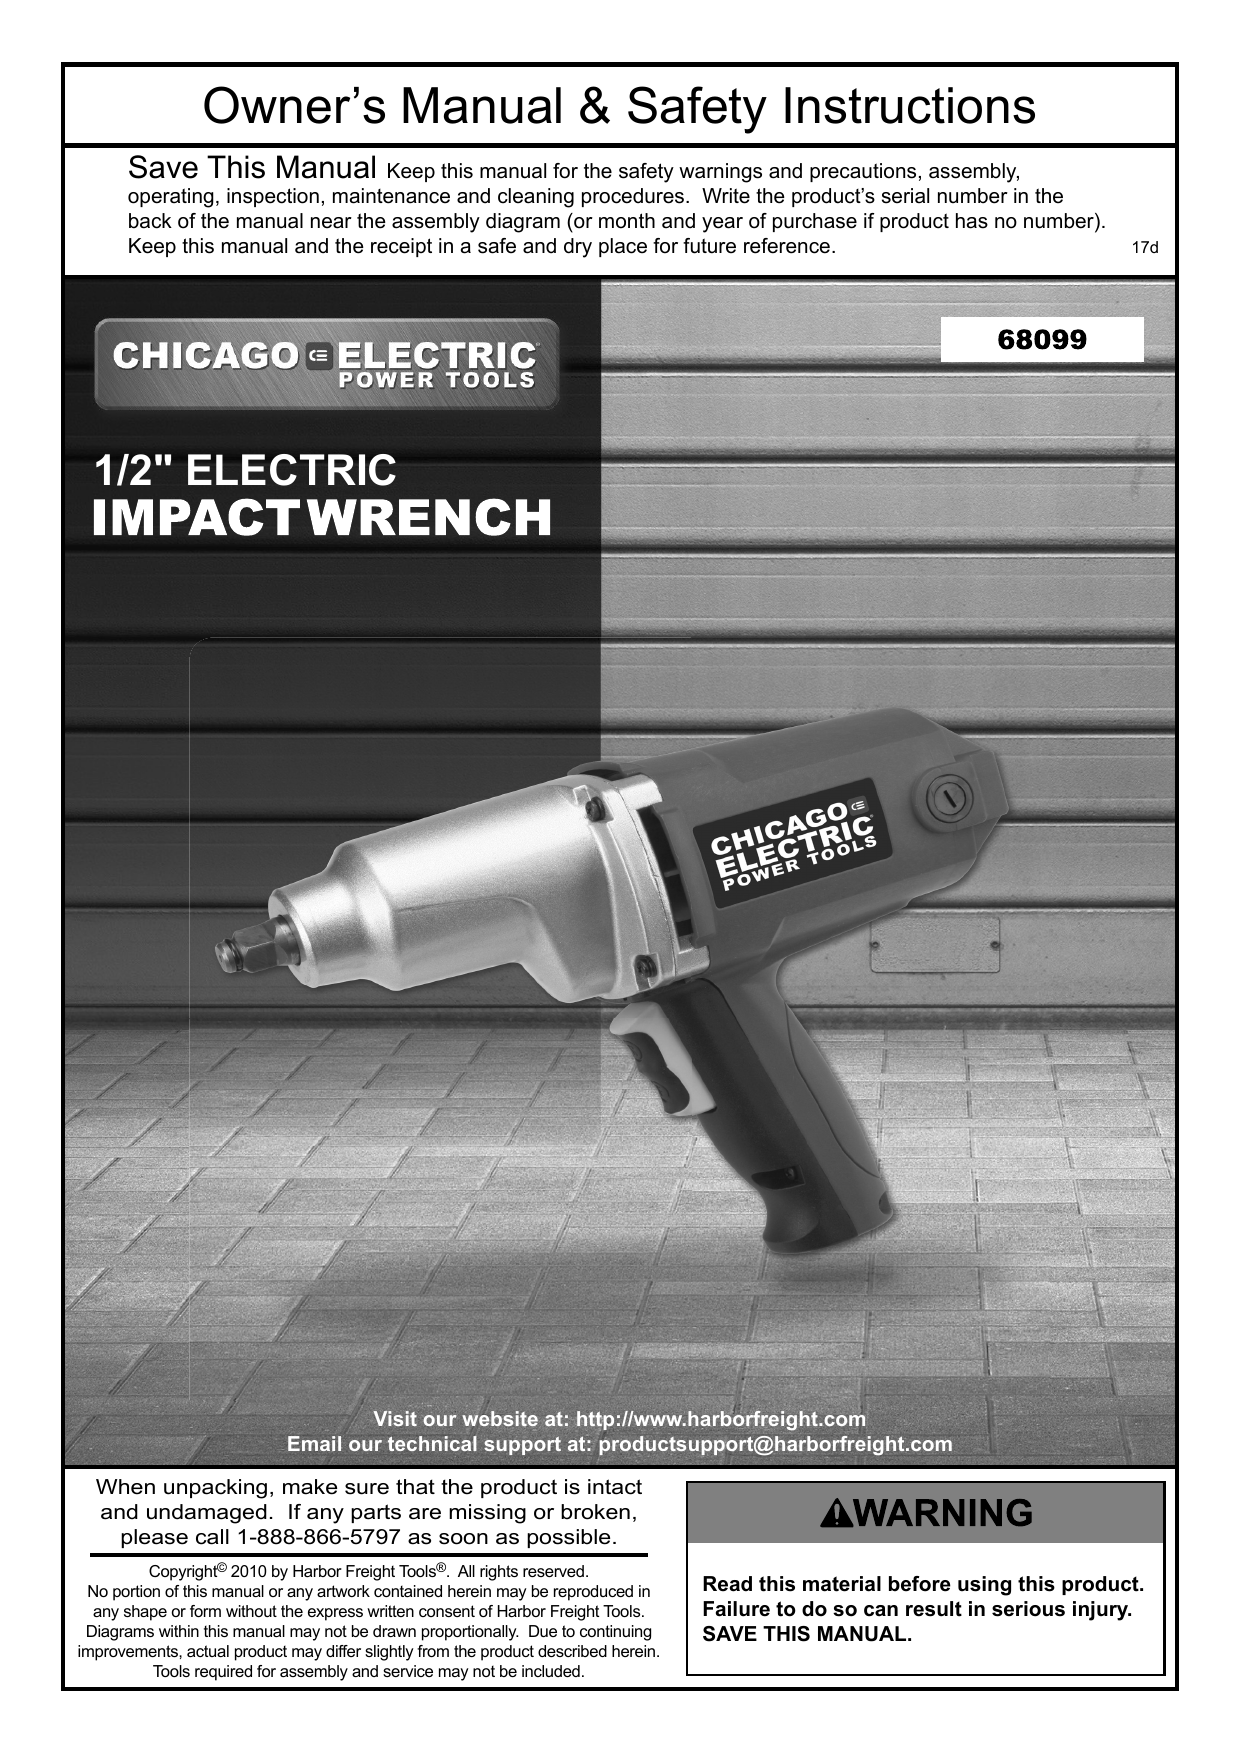 Near инструкция. Electric Impact Wrench. Чикаго электрик. Warning:before using read Safety manual made in Taiwan дуло.